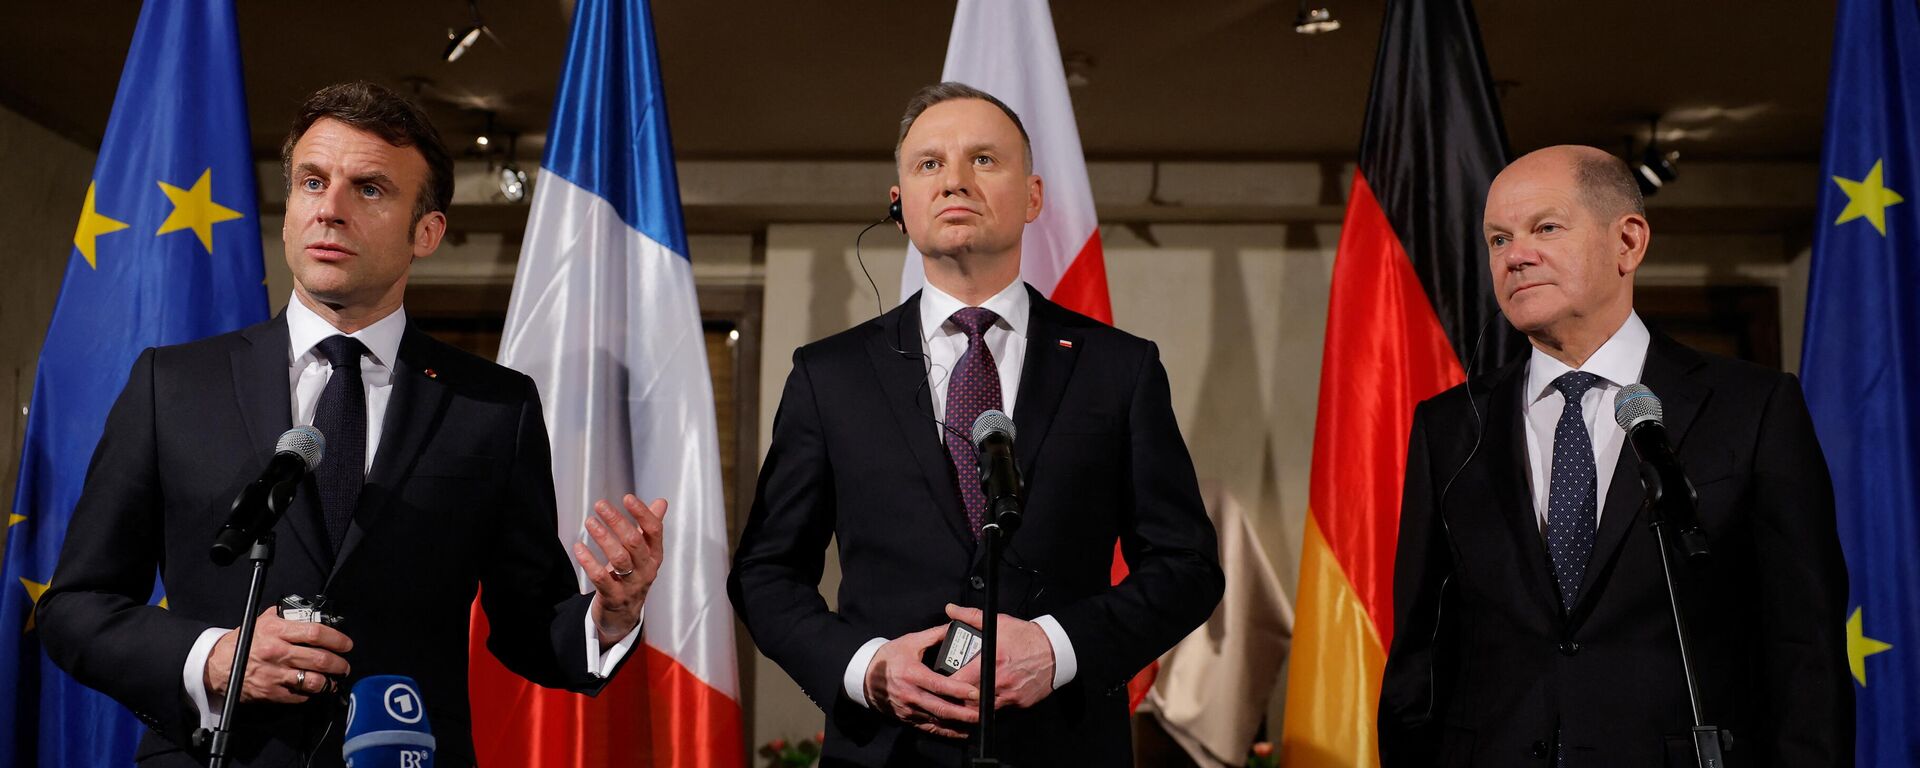 French President Emmanuel Macron (L), Poland's President Andrzej Duda (C) and German Chancellor Olaf Scholz (R) make a statement after their meeting during the Munich Security Conference (MSC) in Munich, southern Germany, on February 17, 2023. (Photo by Odd ANDERSEN / AFP) - Sputnik International, 1920, 20.02.2023